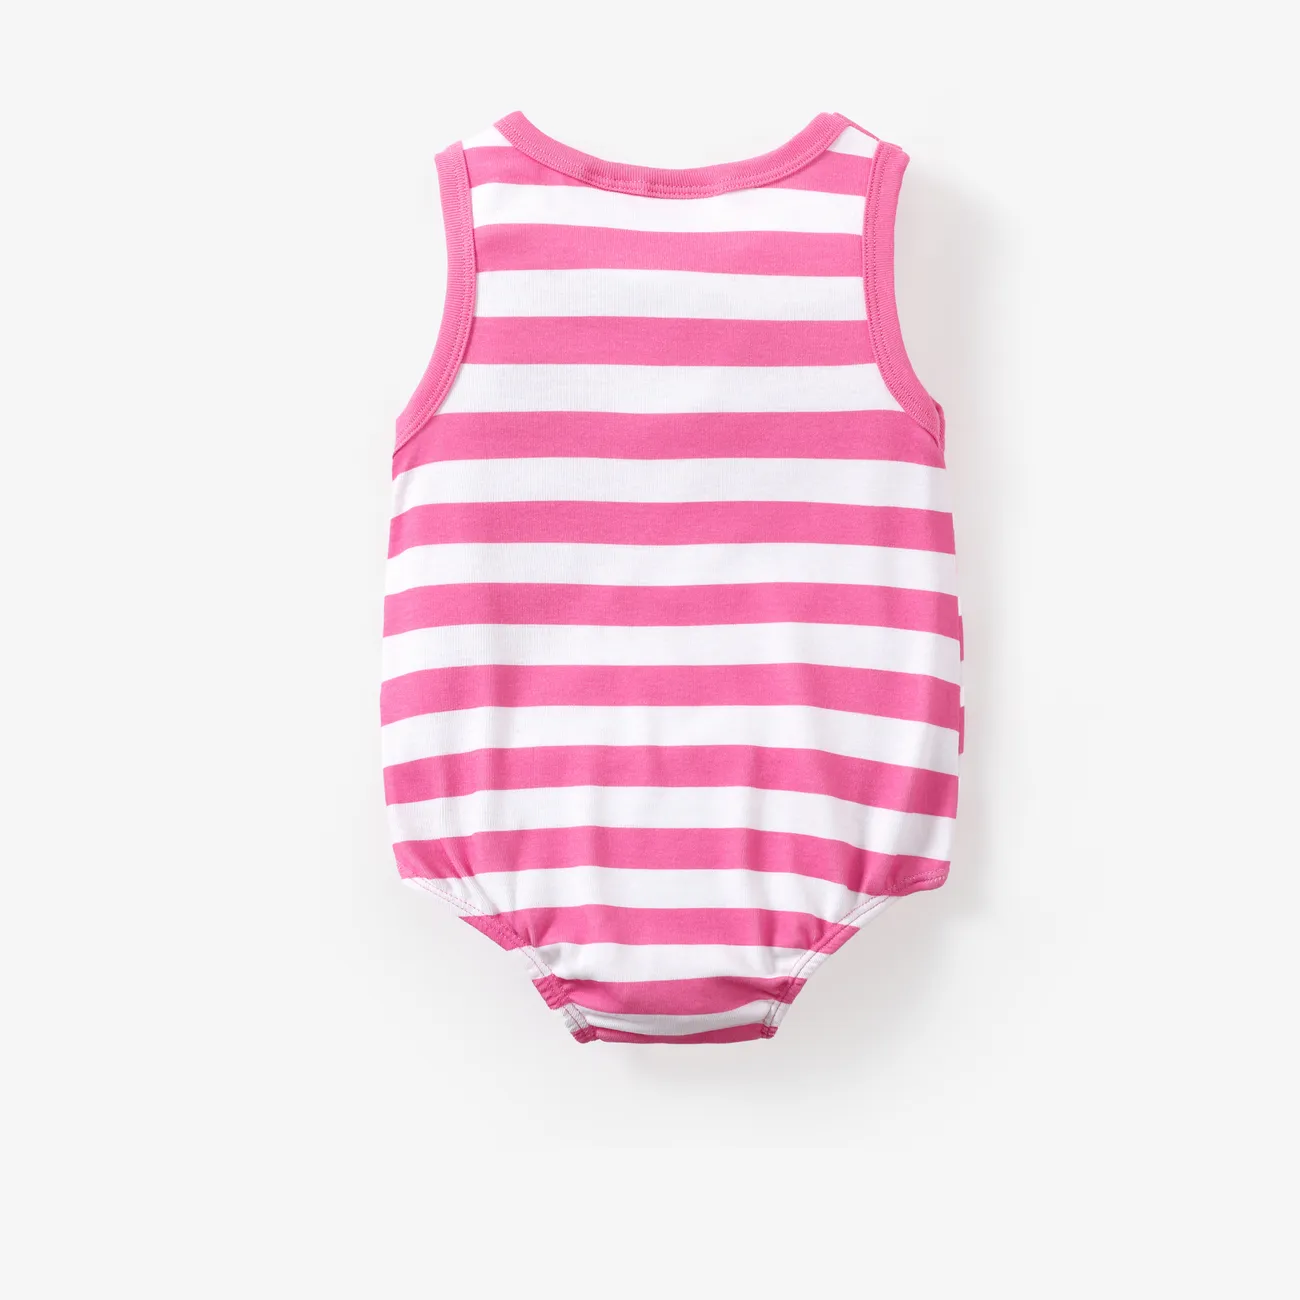 Disney Mickey and Friends Baby Boy/Girl 1pc Naia™ Navy Collar Striped Sleeveless Romper Pink big image 1